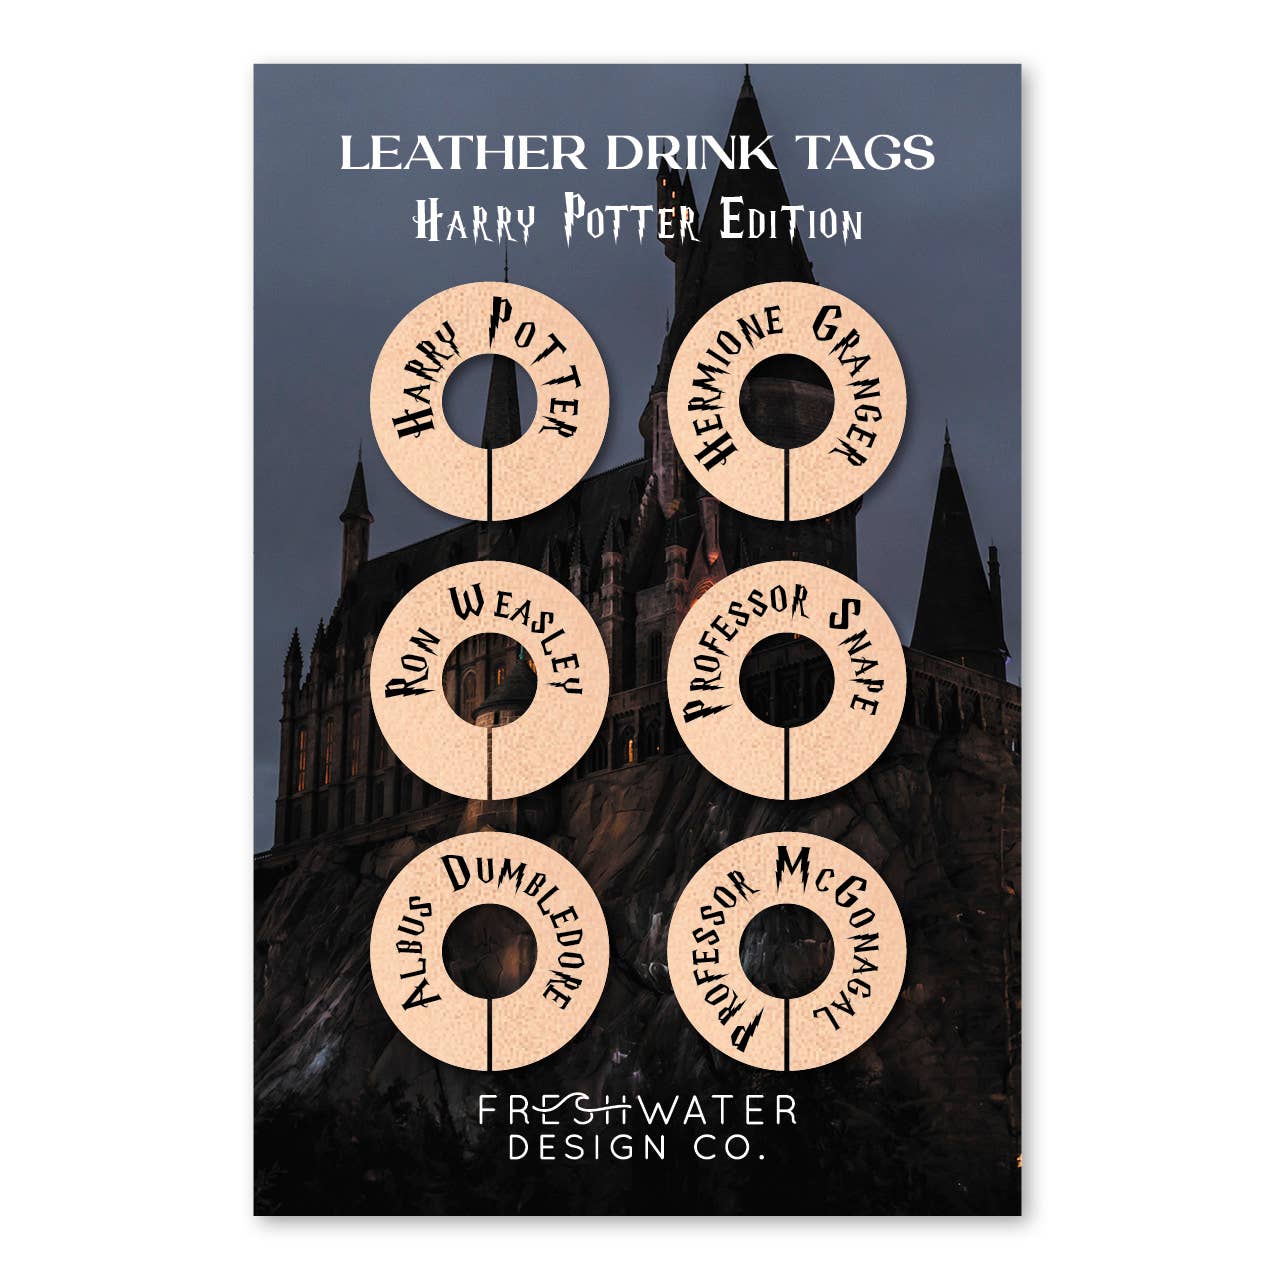 Harry Potter Leather Drink Tags